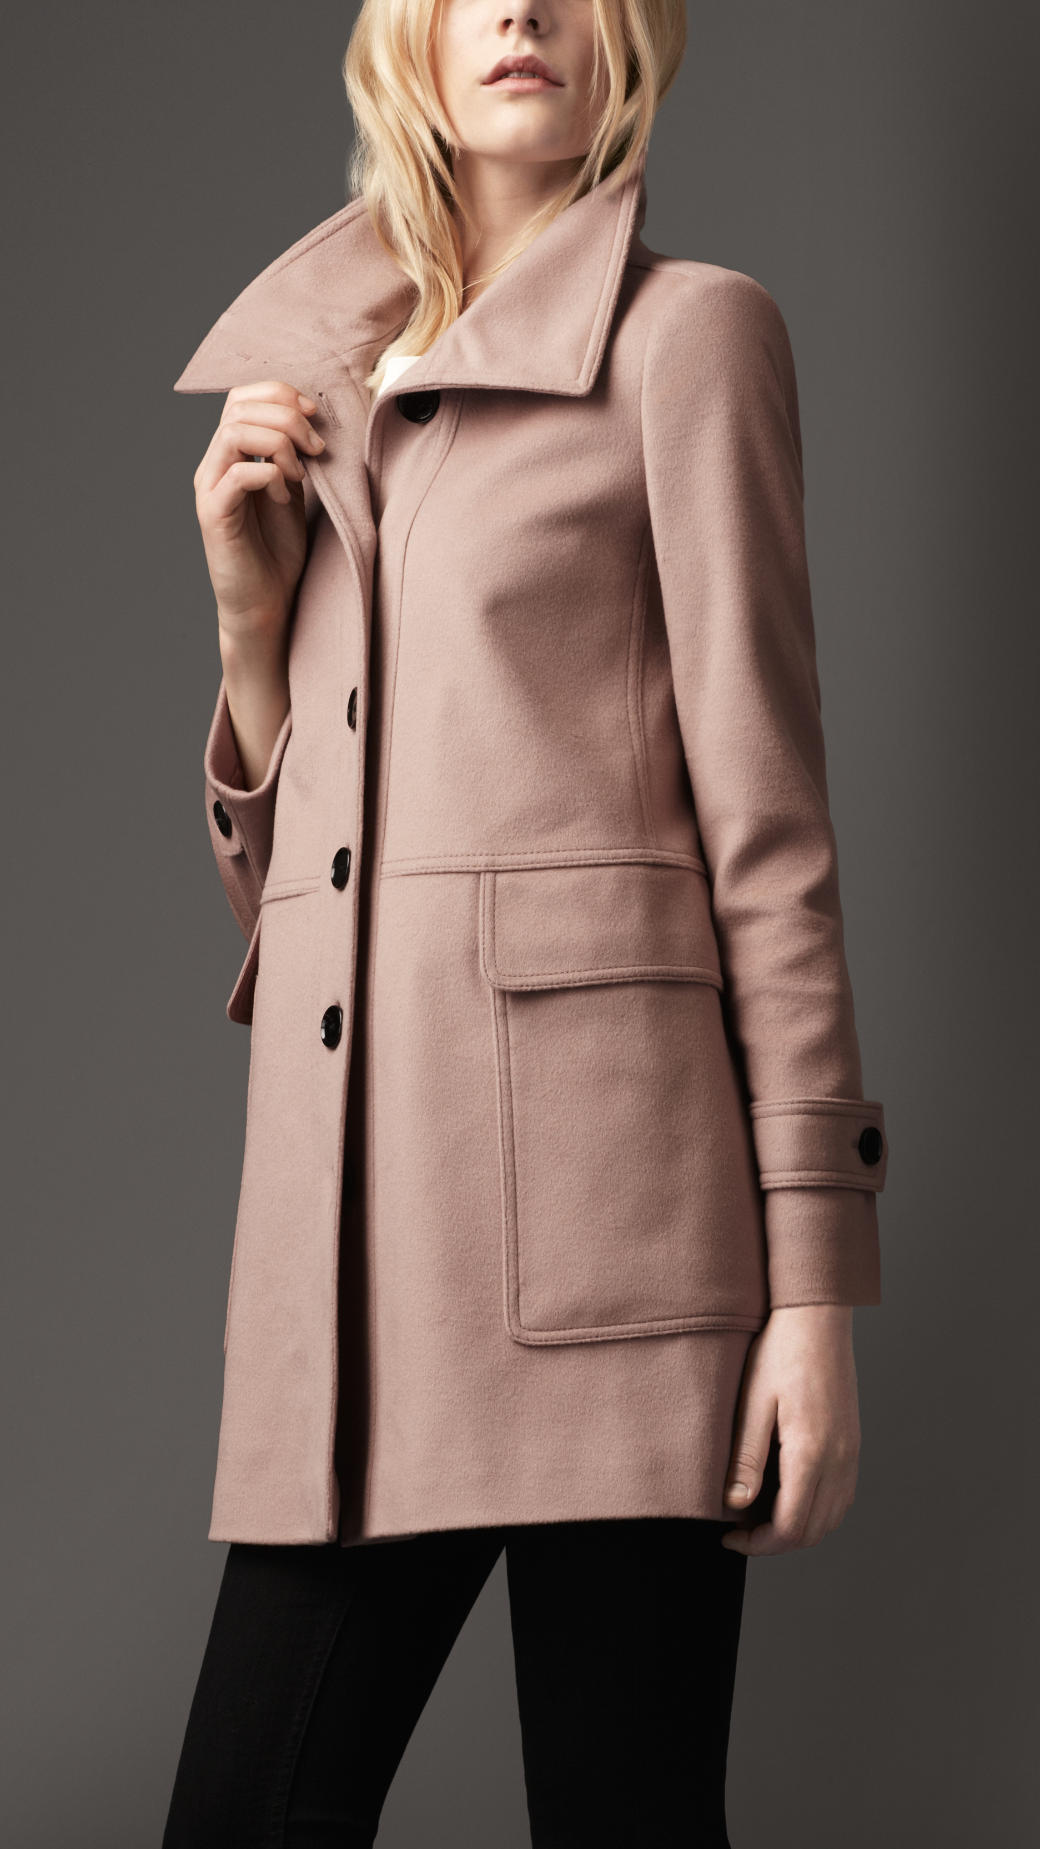 Lyst - Burberry Tailored Wool Cashmere Coat in Pink